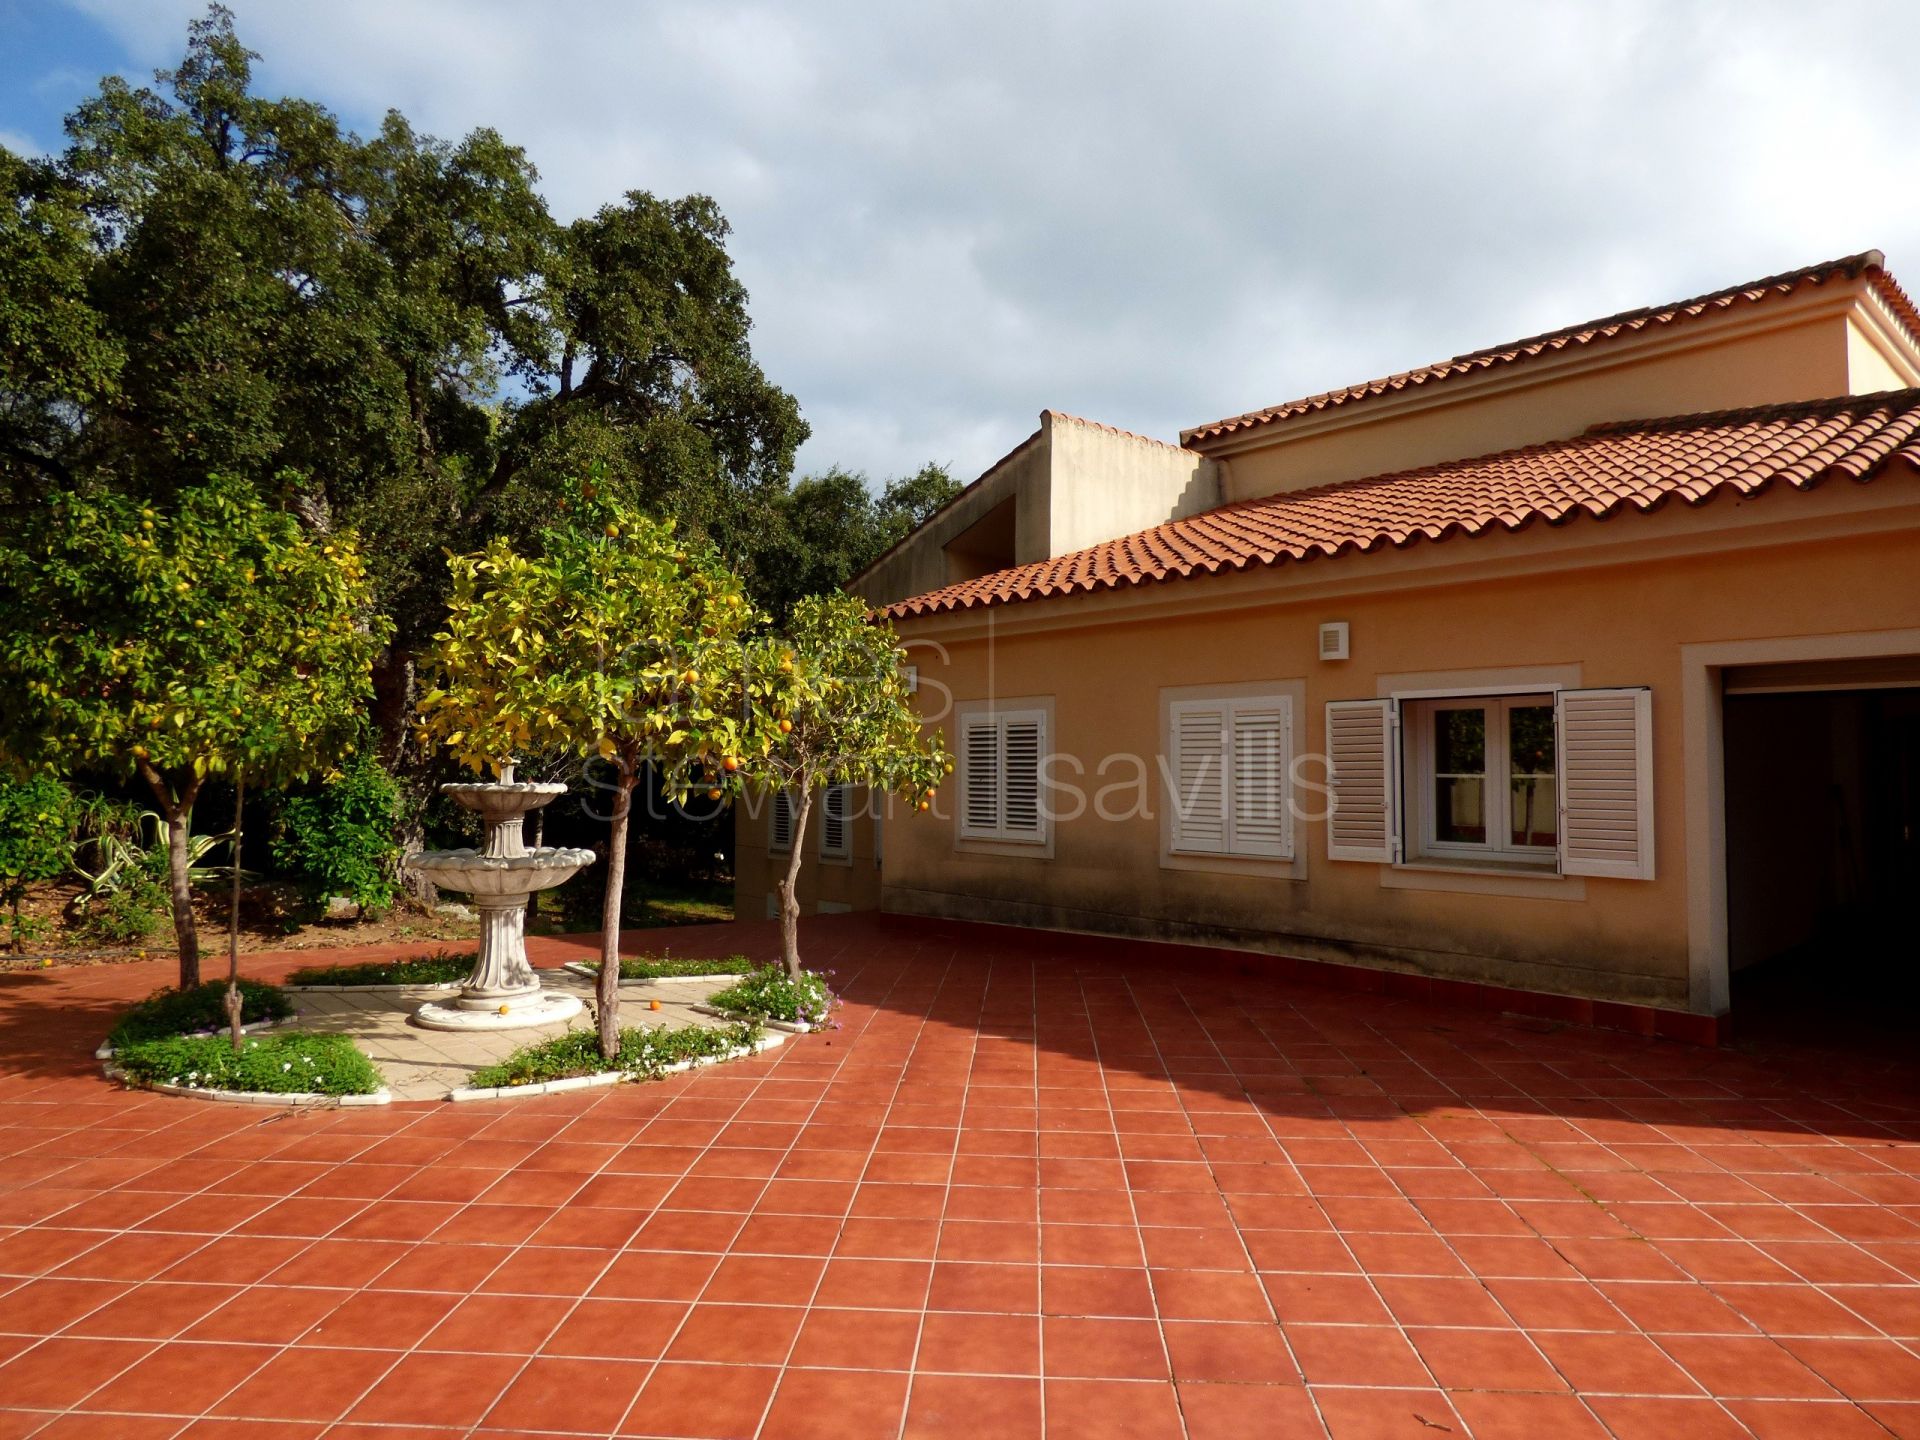 Spacious villa in one of the desirable streets of central Sotogrande